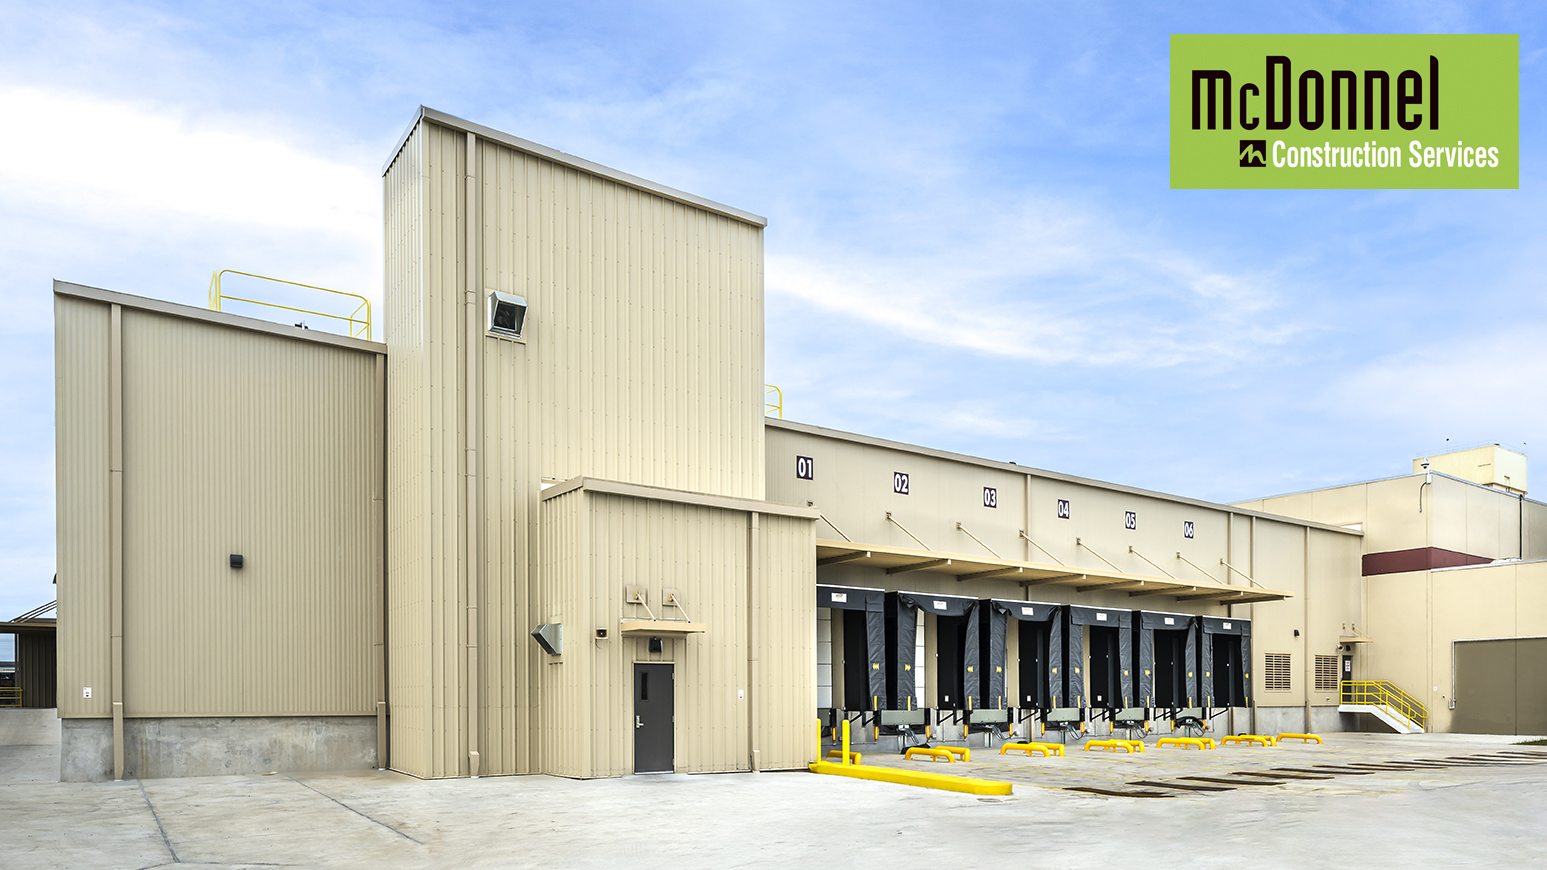 food & beverage construction of loading dock by The McDonnel Group